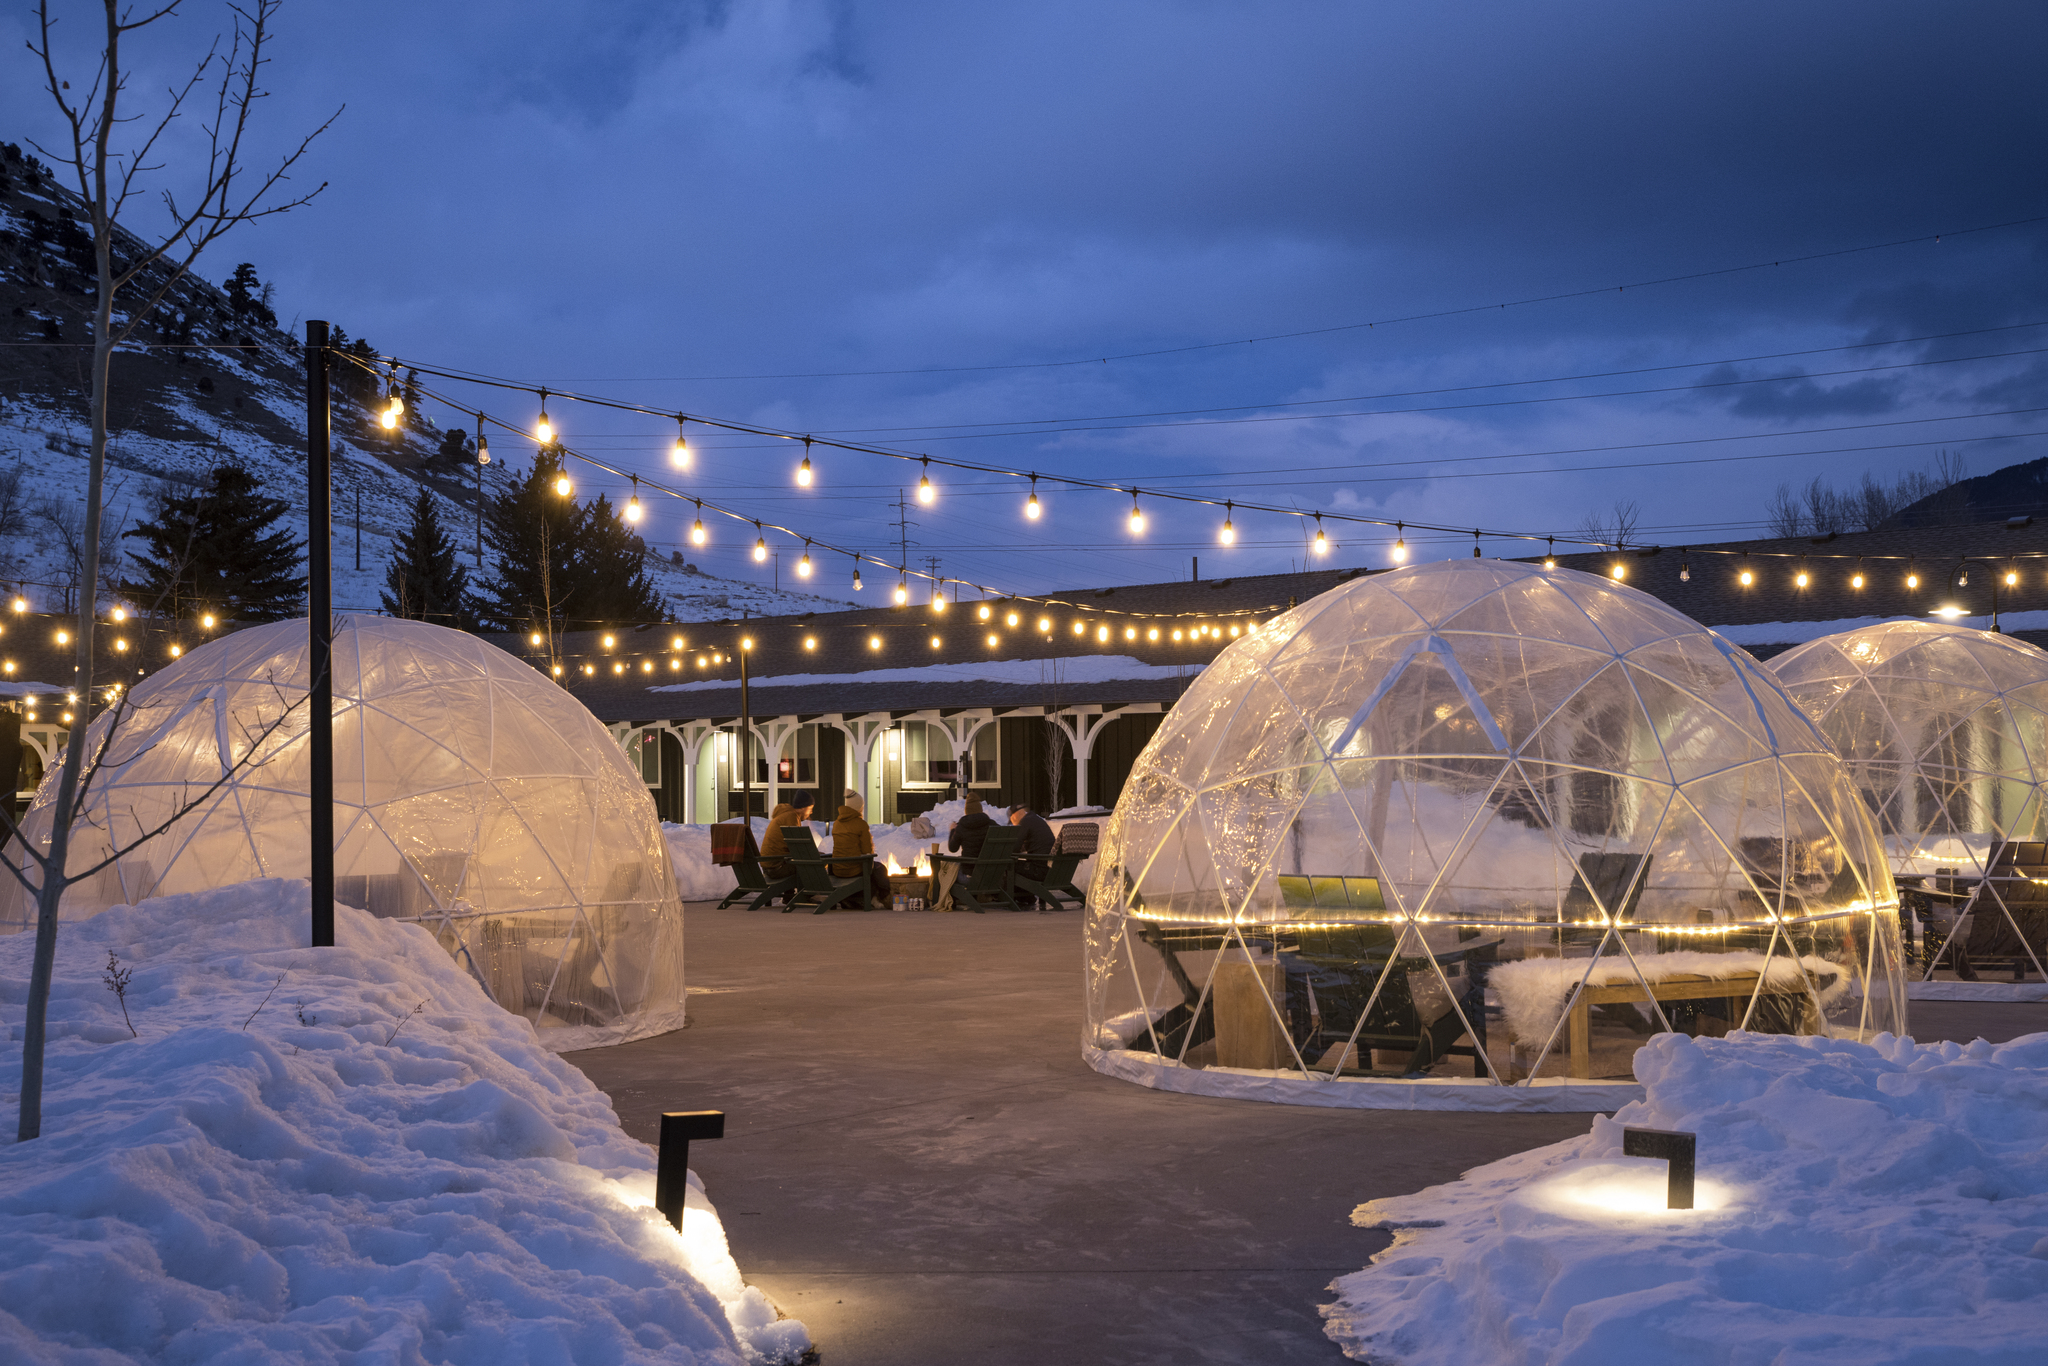 Unique igloo-inspired outdoor dining area with exceptional lighting creates an impressive atmosphere.